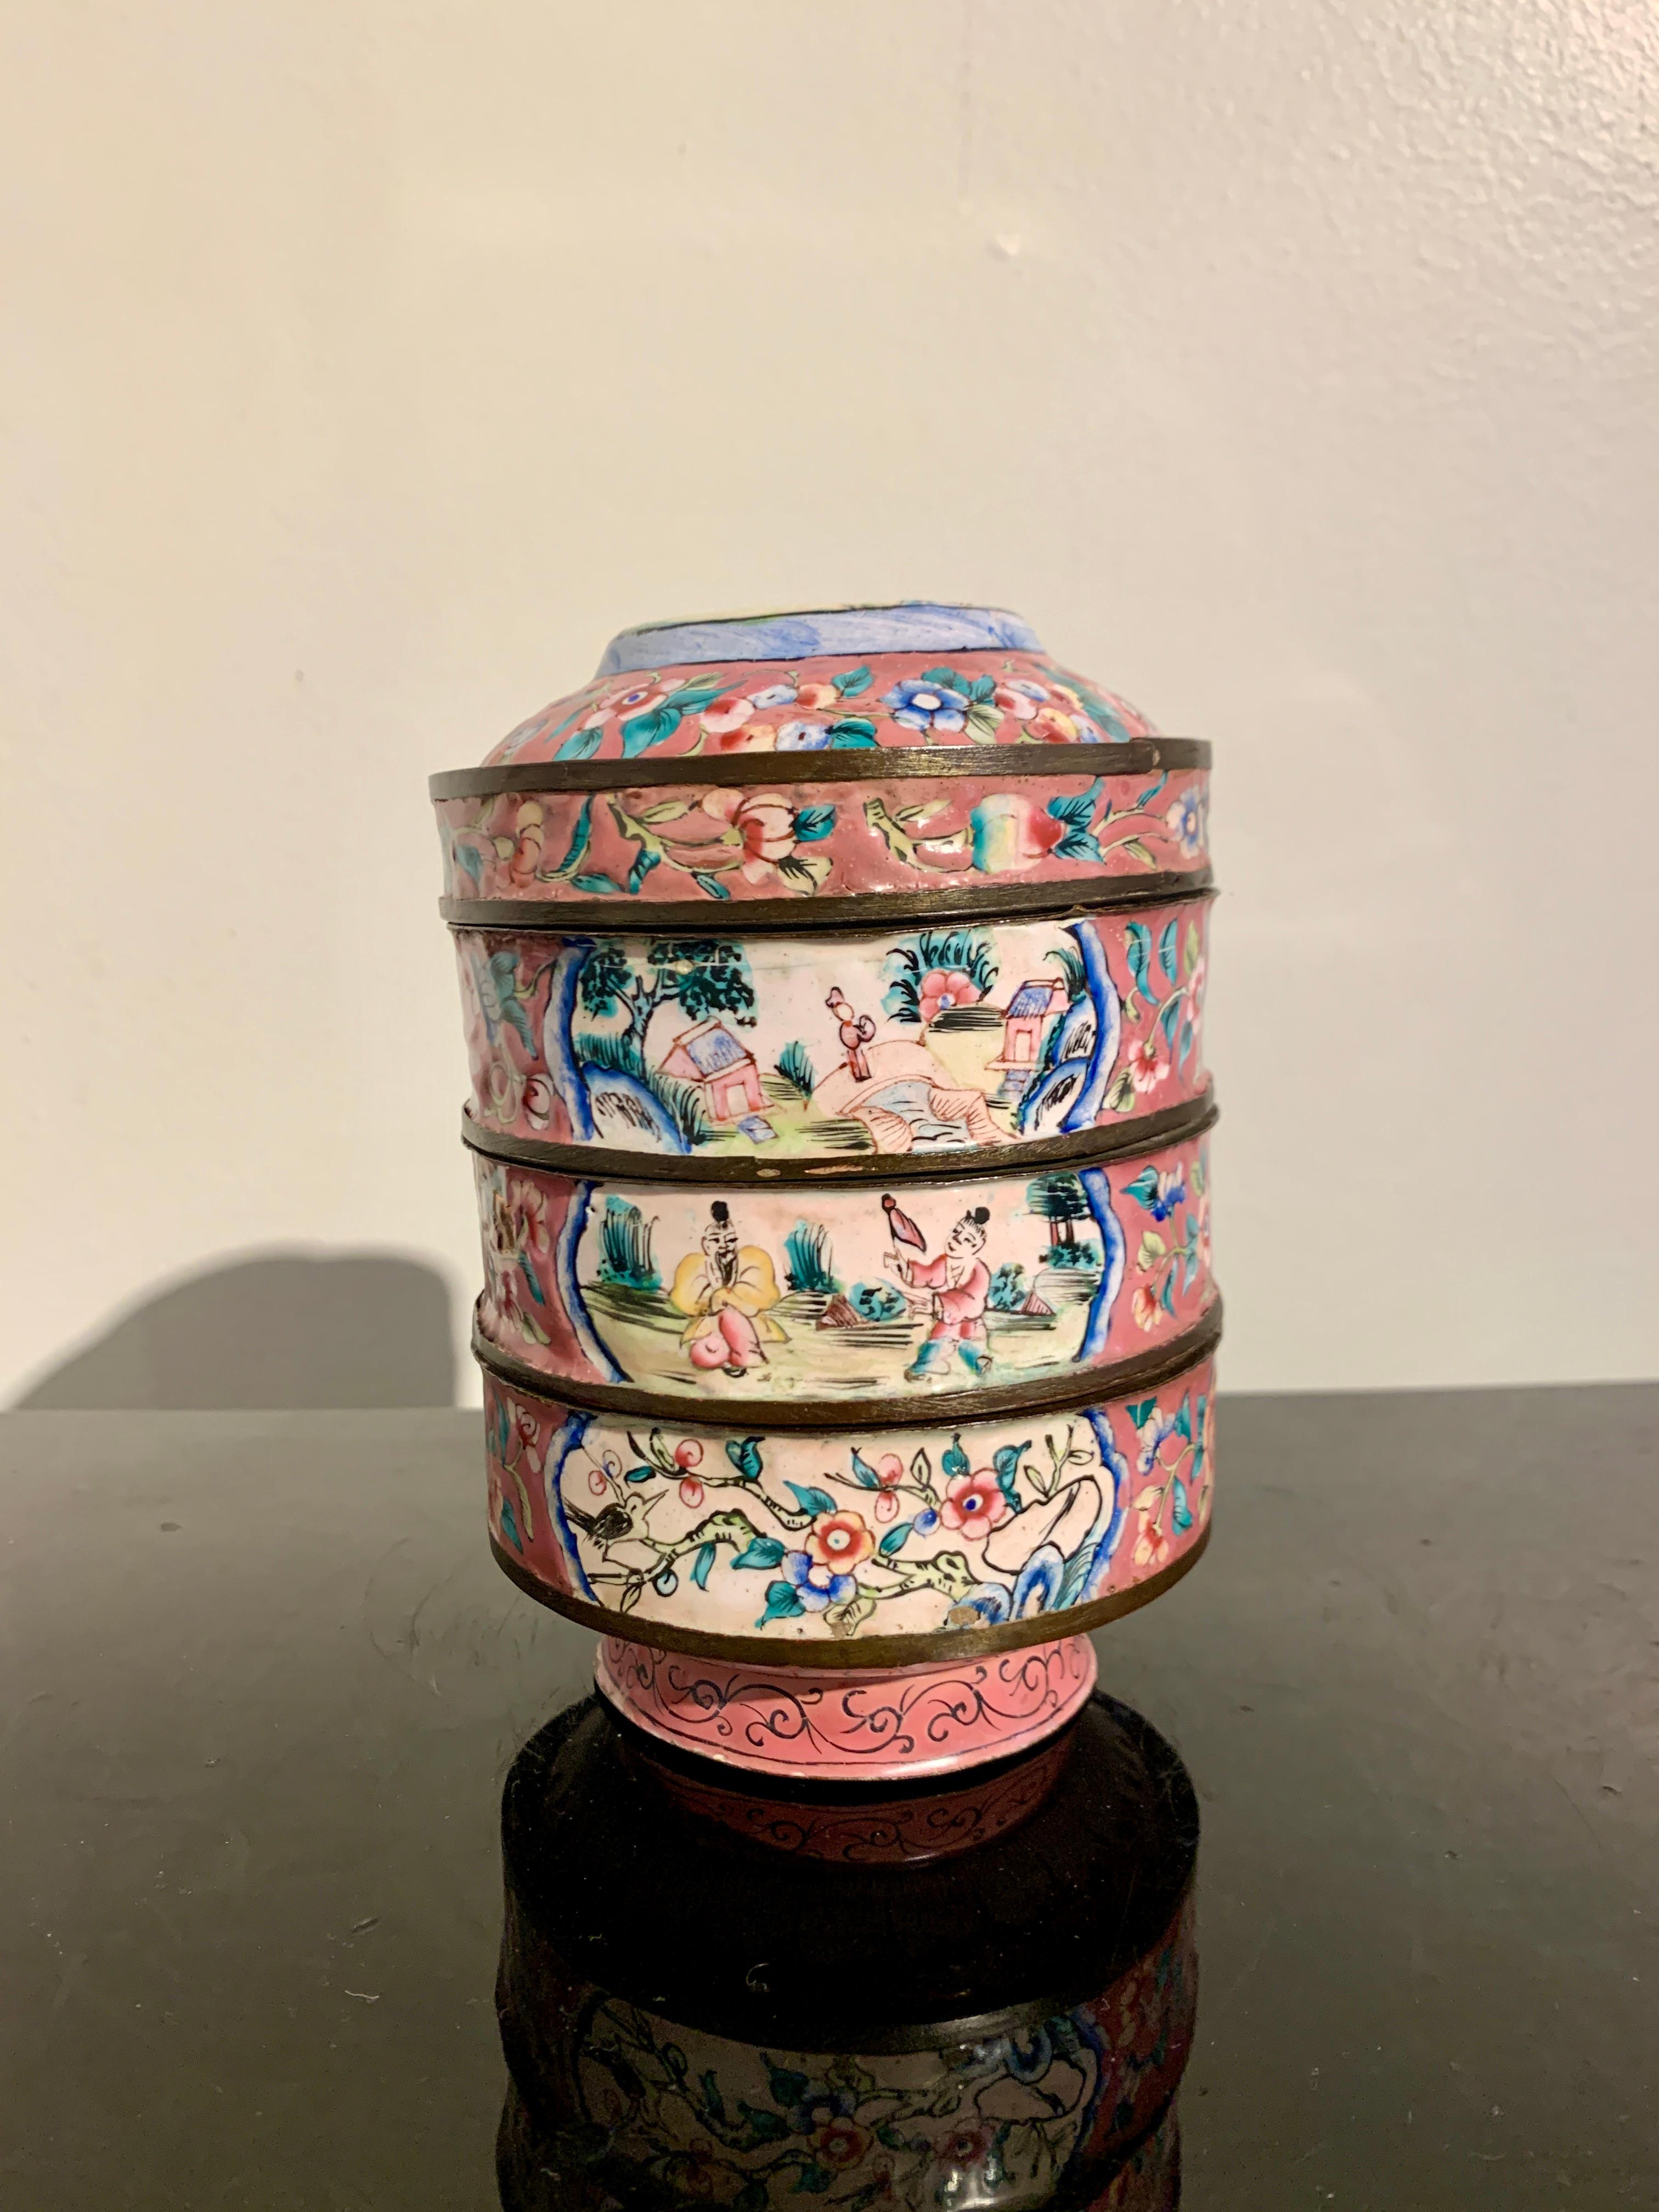 An absolutely lovely Chinese export pink Canton enamel round stacking box and cover, late Qing Dynasty, circa 1900, China.

The circular stacking box consists of a bowl form base, two round stacking round trays, and a cover that can be inverted to